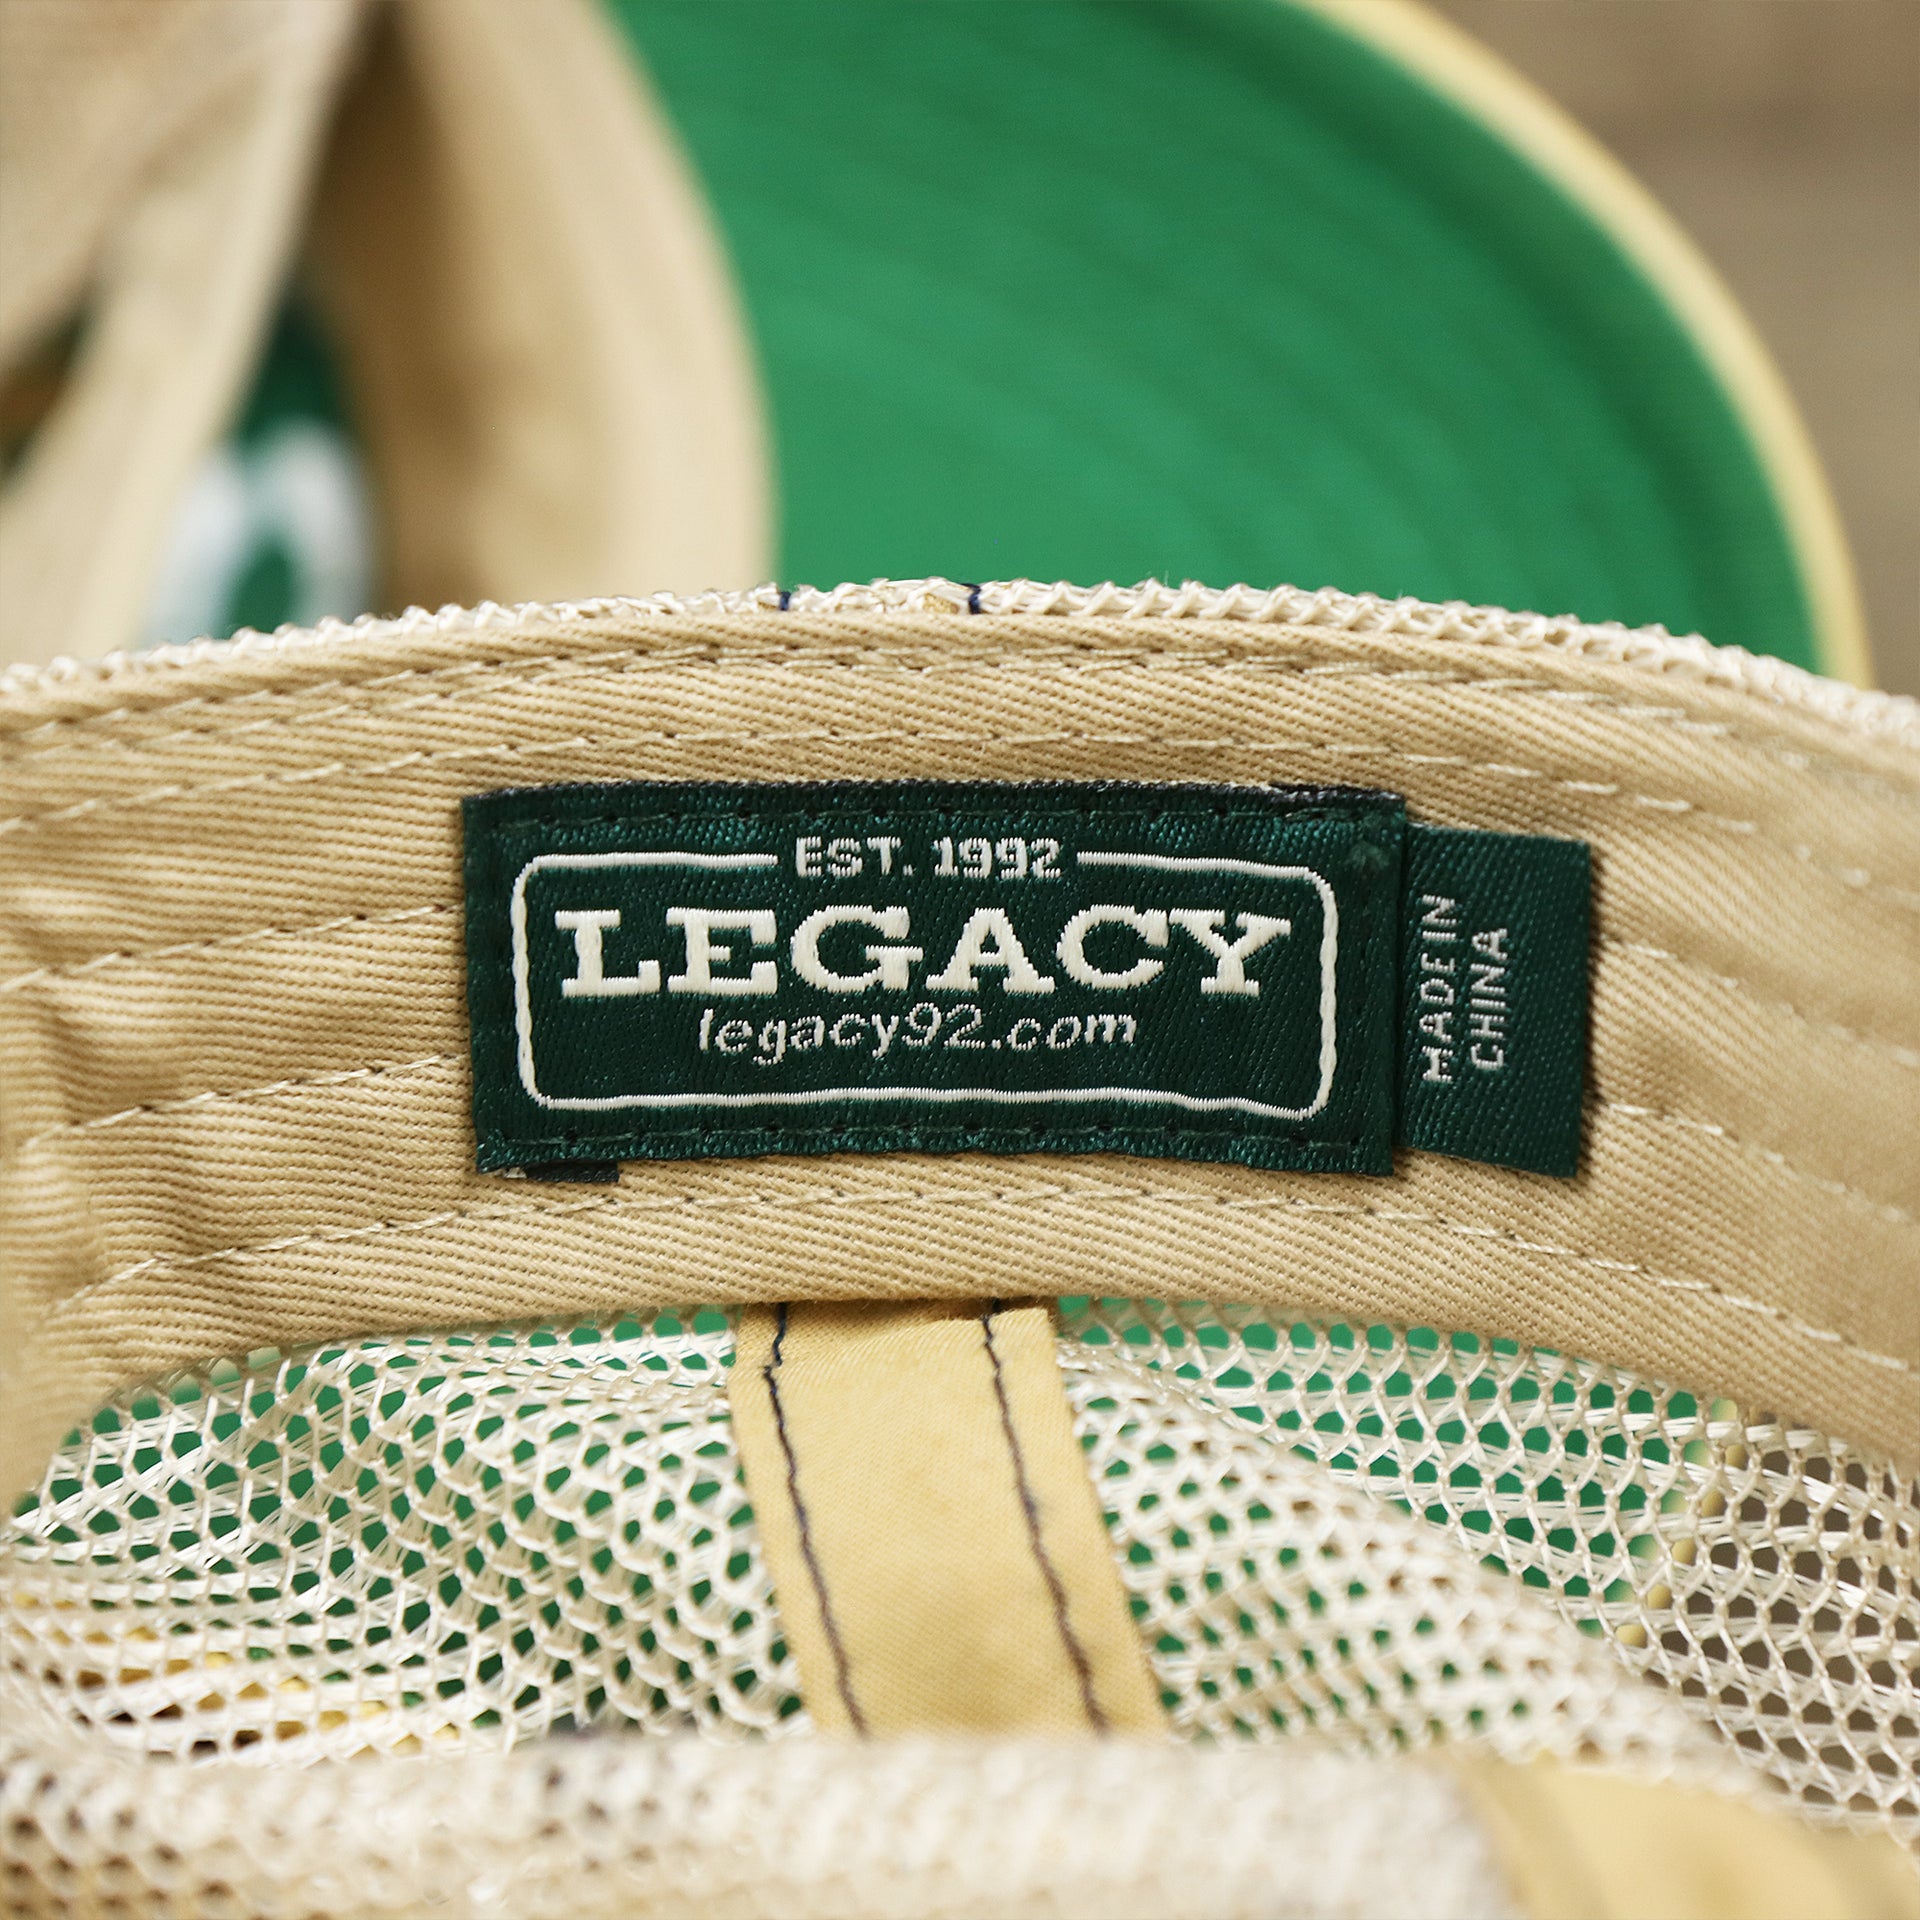 The Legacy Tag on the Wildwood New Jersey Leather Patch Shoreline Gradient Design Vintage Trucker Hat | Washed Gradient Trucker Hat